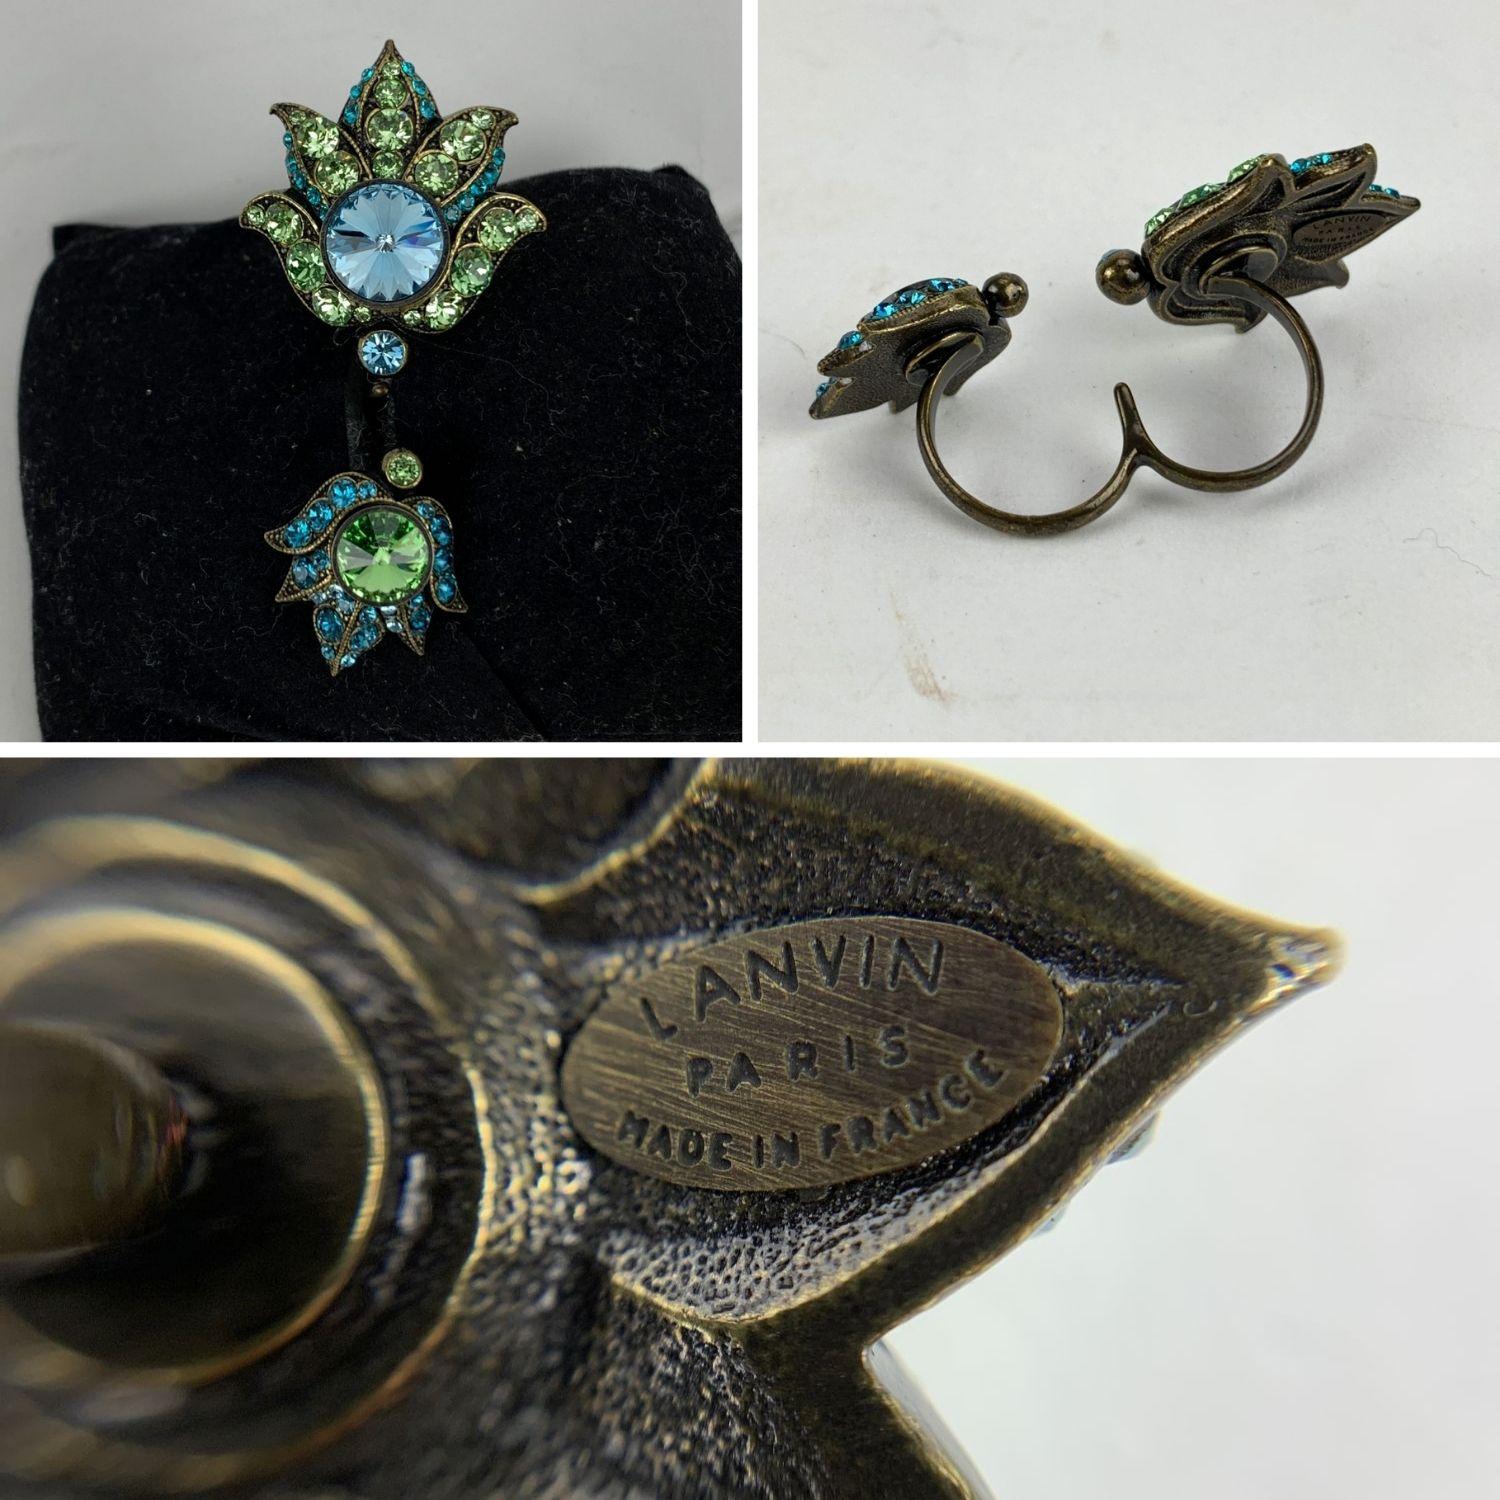 Lanvin's crystal-embellished ring is designed to sit across two fingers. The gold-tone brass bands give this striking adornment an elegant, vintage feel. Green and turquoise crystals. 'LANVIN Paris - Made in France' oval tag on the reverse of the